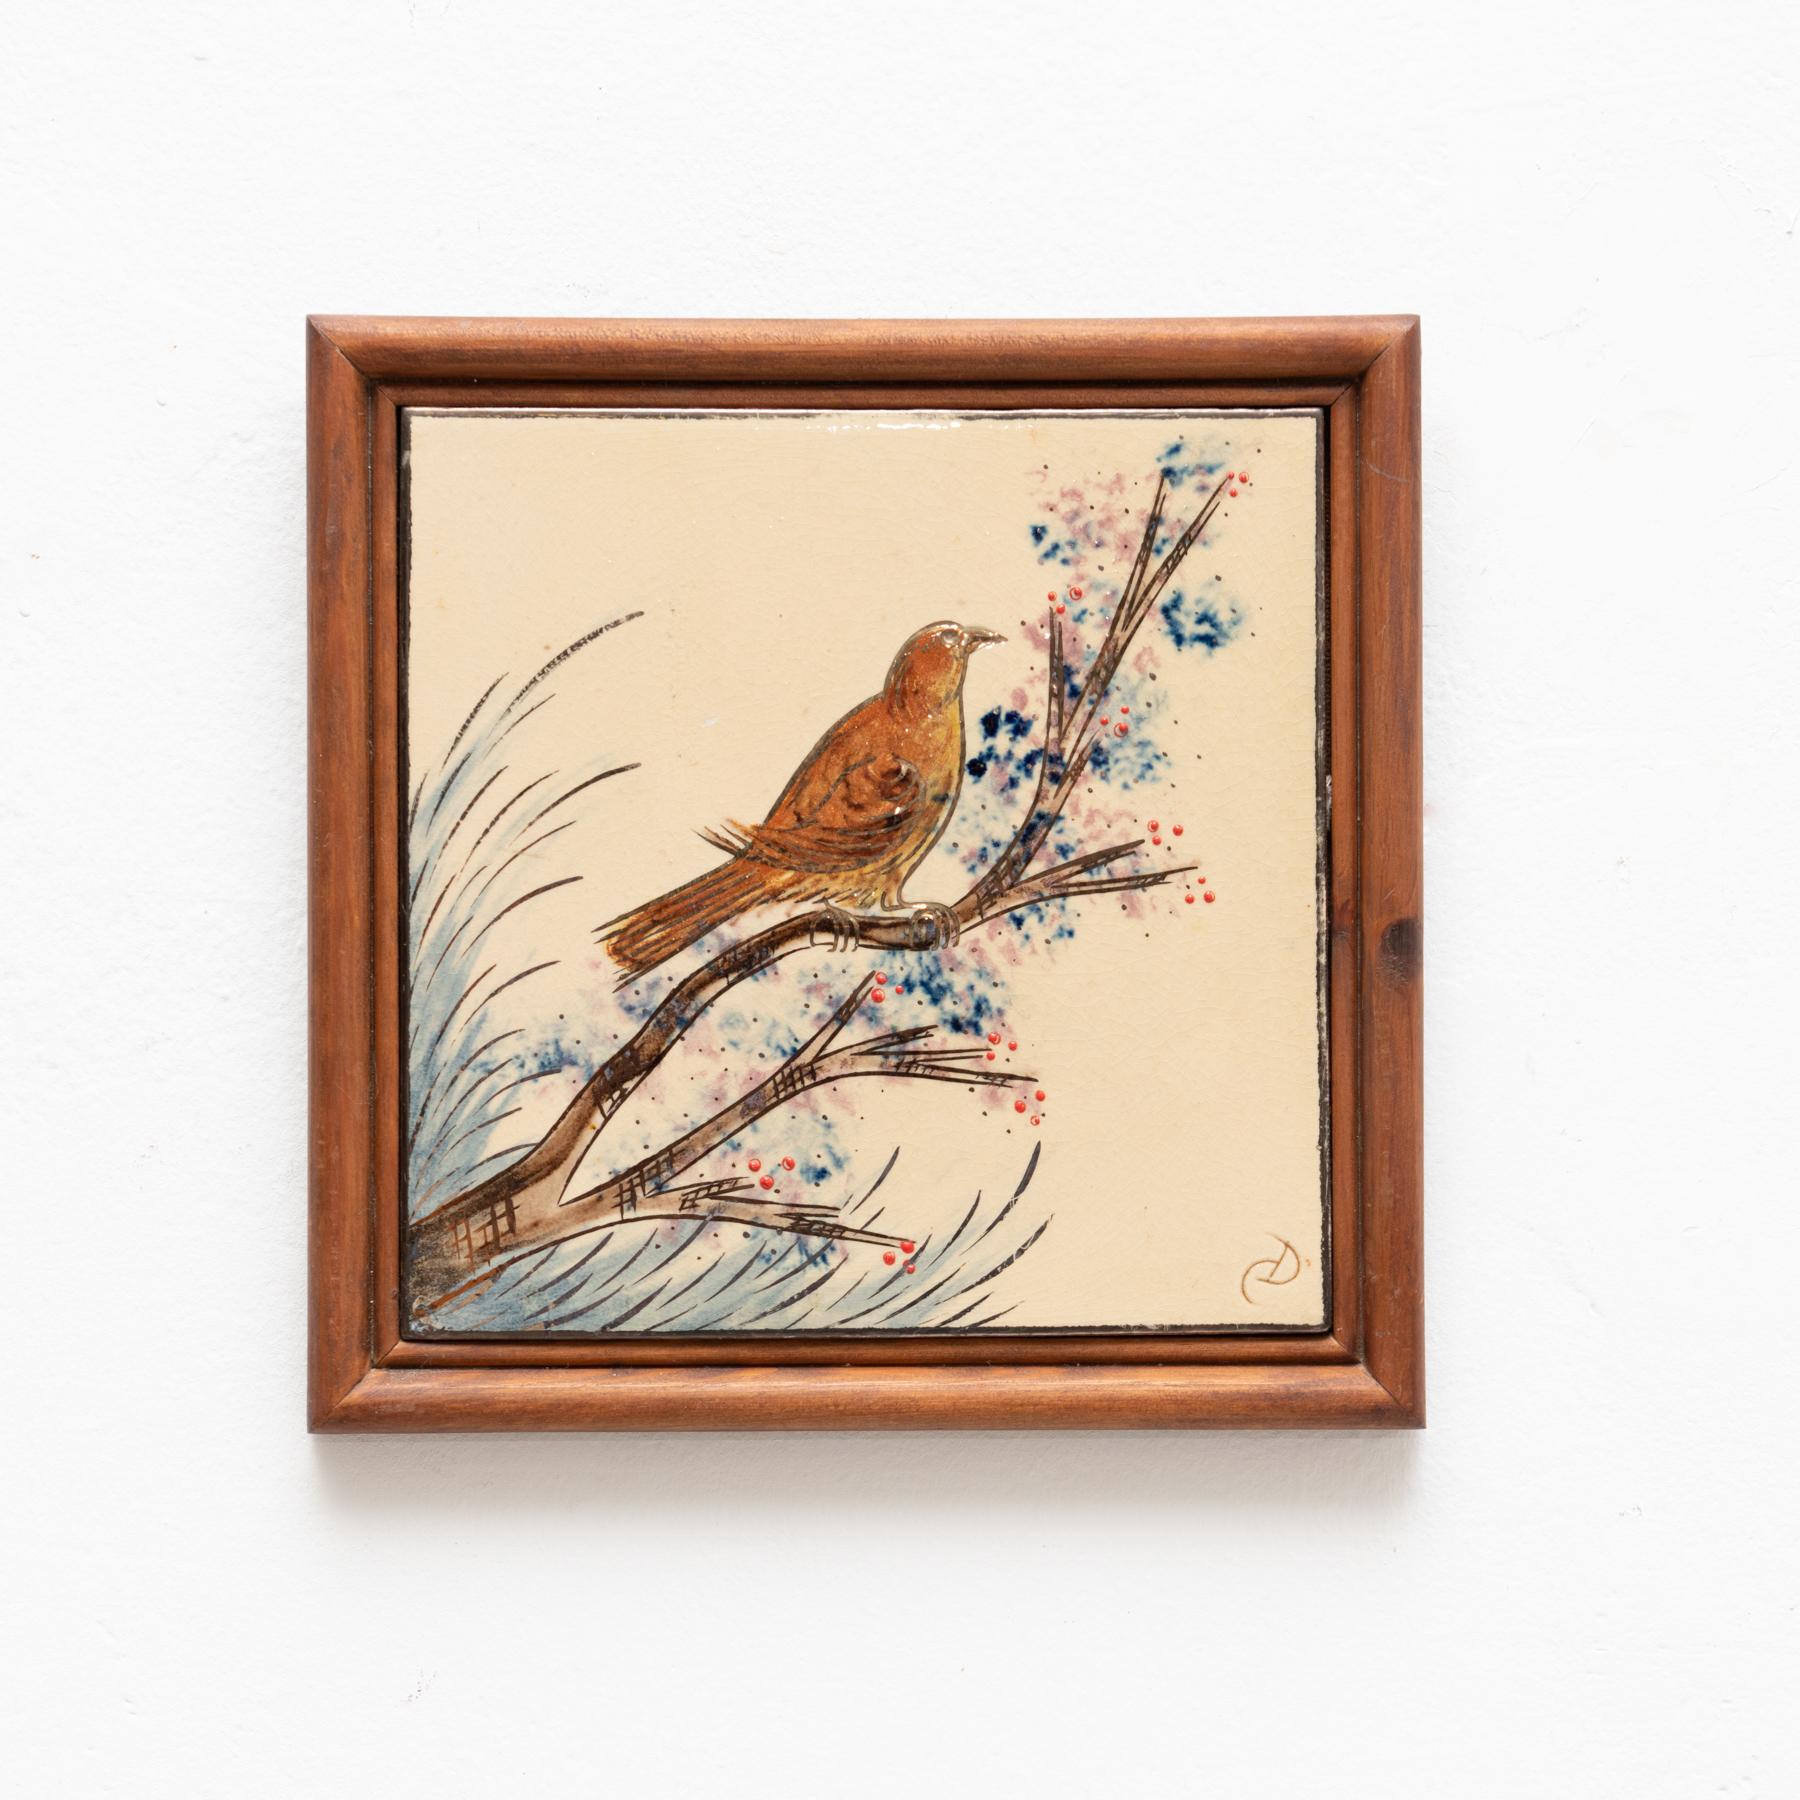 Ceramic hand painted artwork of a bird design by Catalan artist Diaz Costa, circa 1960.
Framed. Signed.

In original condition, with minor wear consistent of age and use, preserving a beautiul patina.